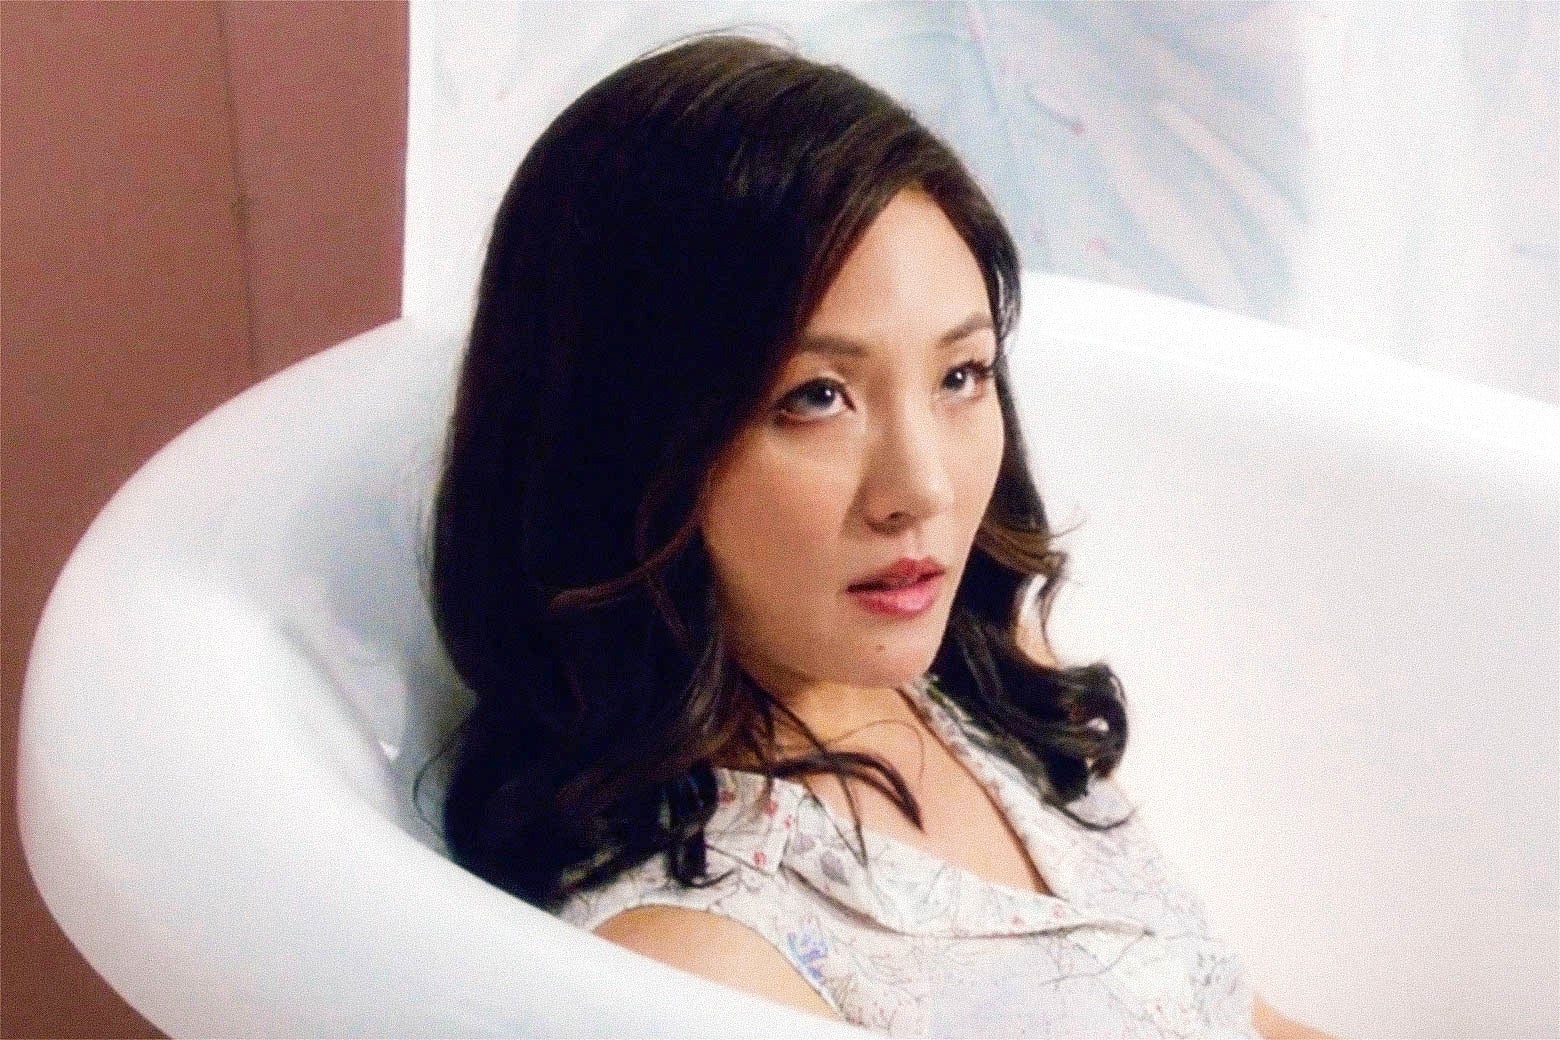 Constance Wu’s character in a bathtub on the show.